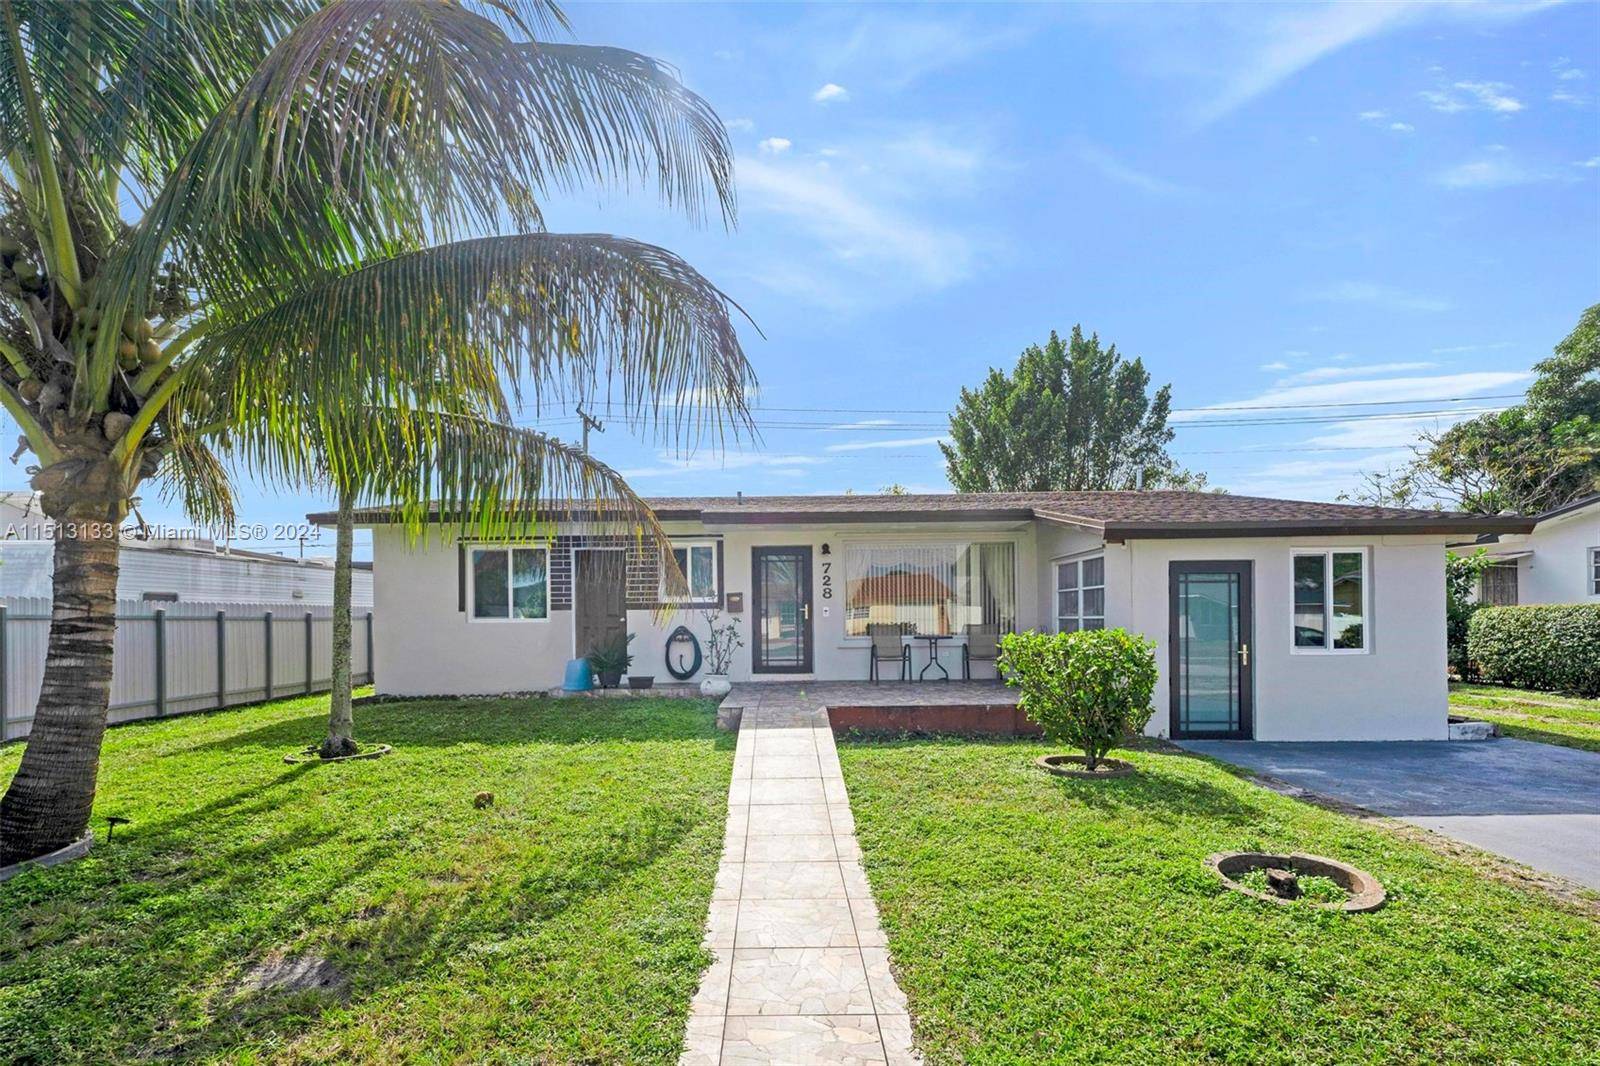 Discover this practical single family home in Hialeah, FL, offering essential features for comfortable living.